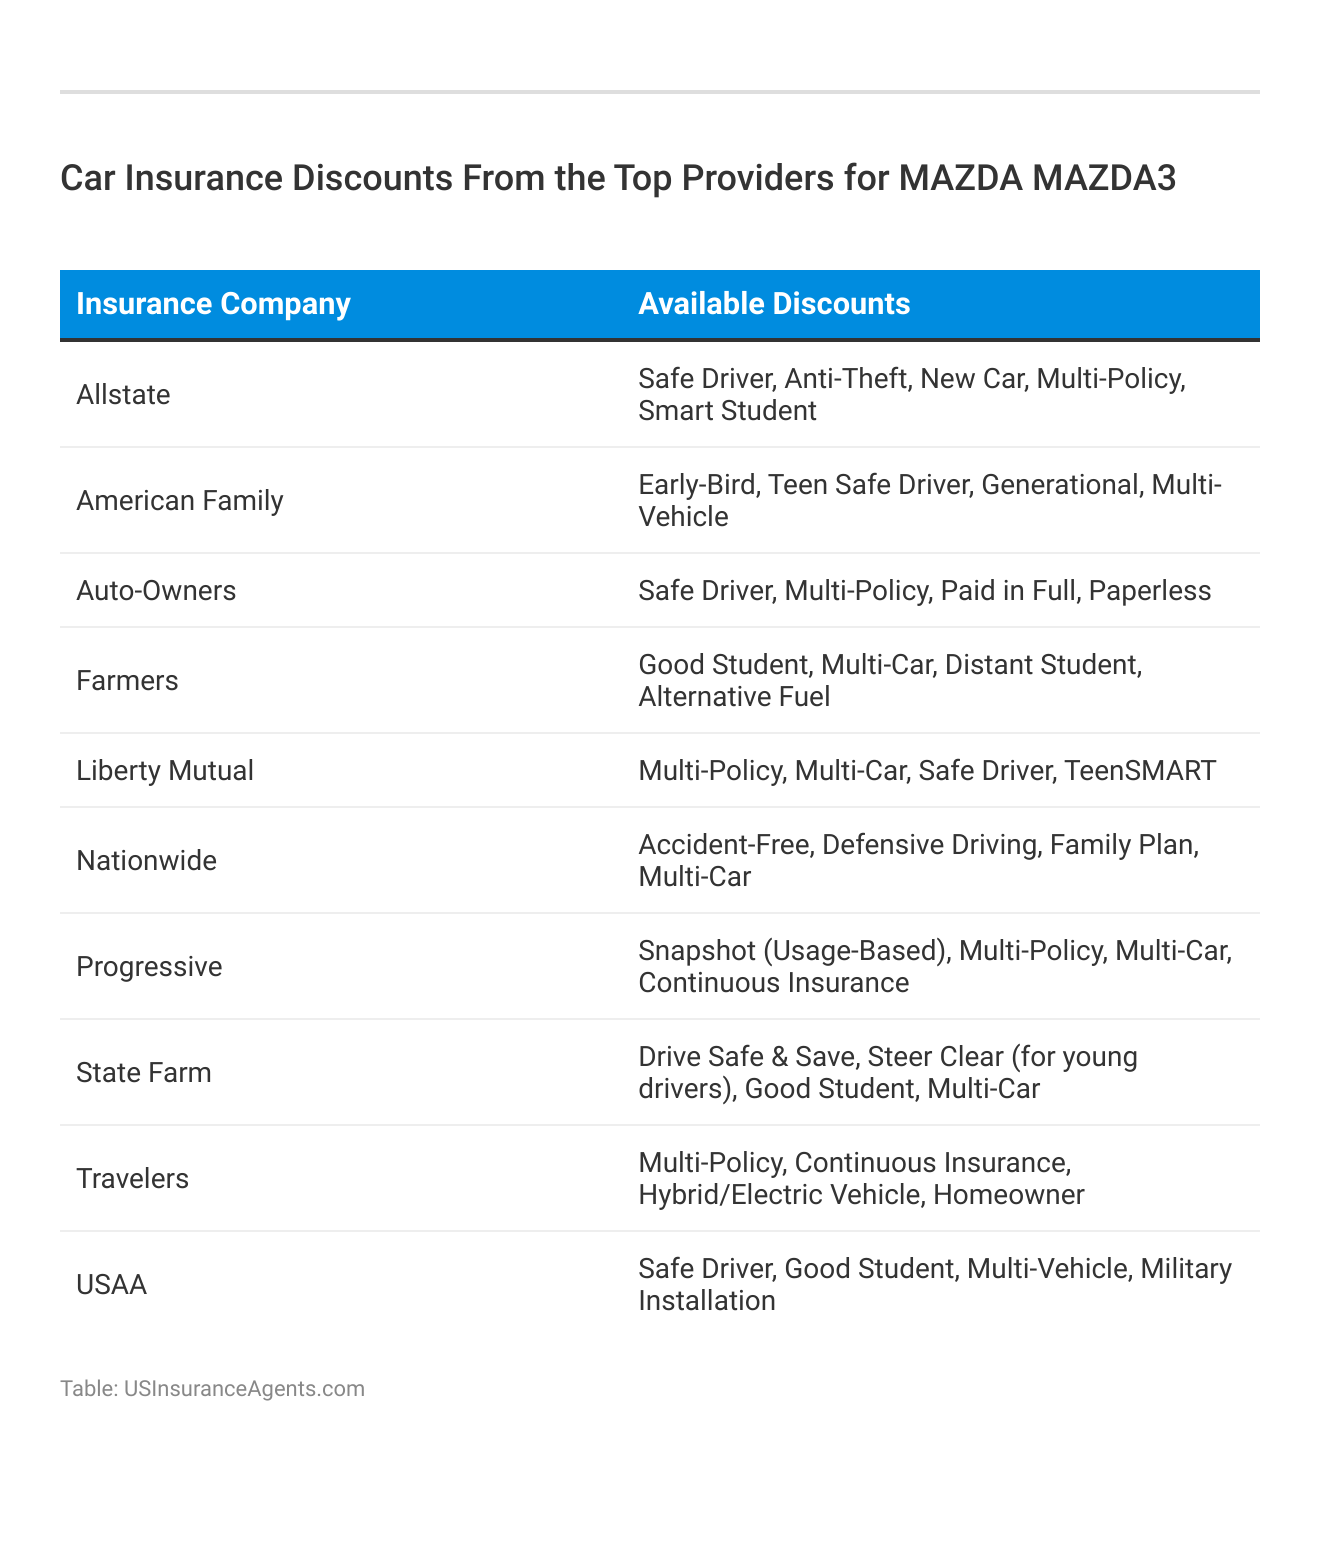 <h3>Car Insurance Discounts From the Top Providers for Mazda Mazda3</h3>